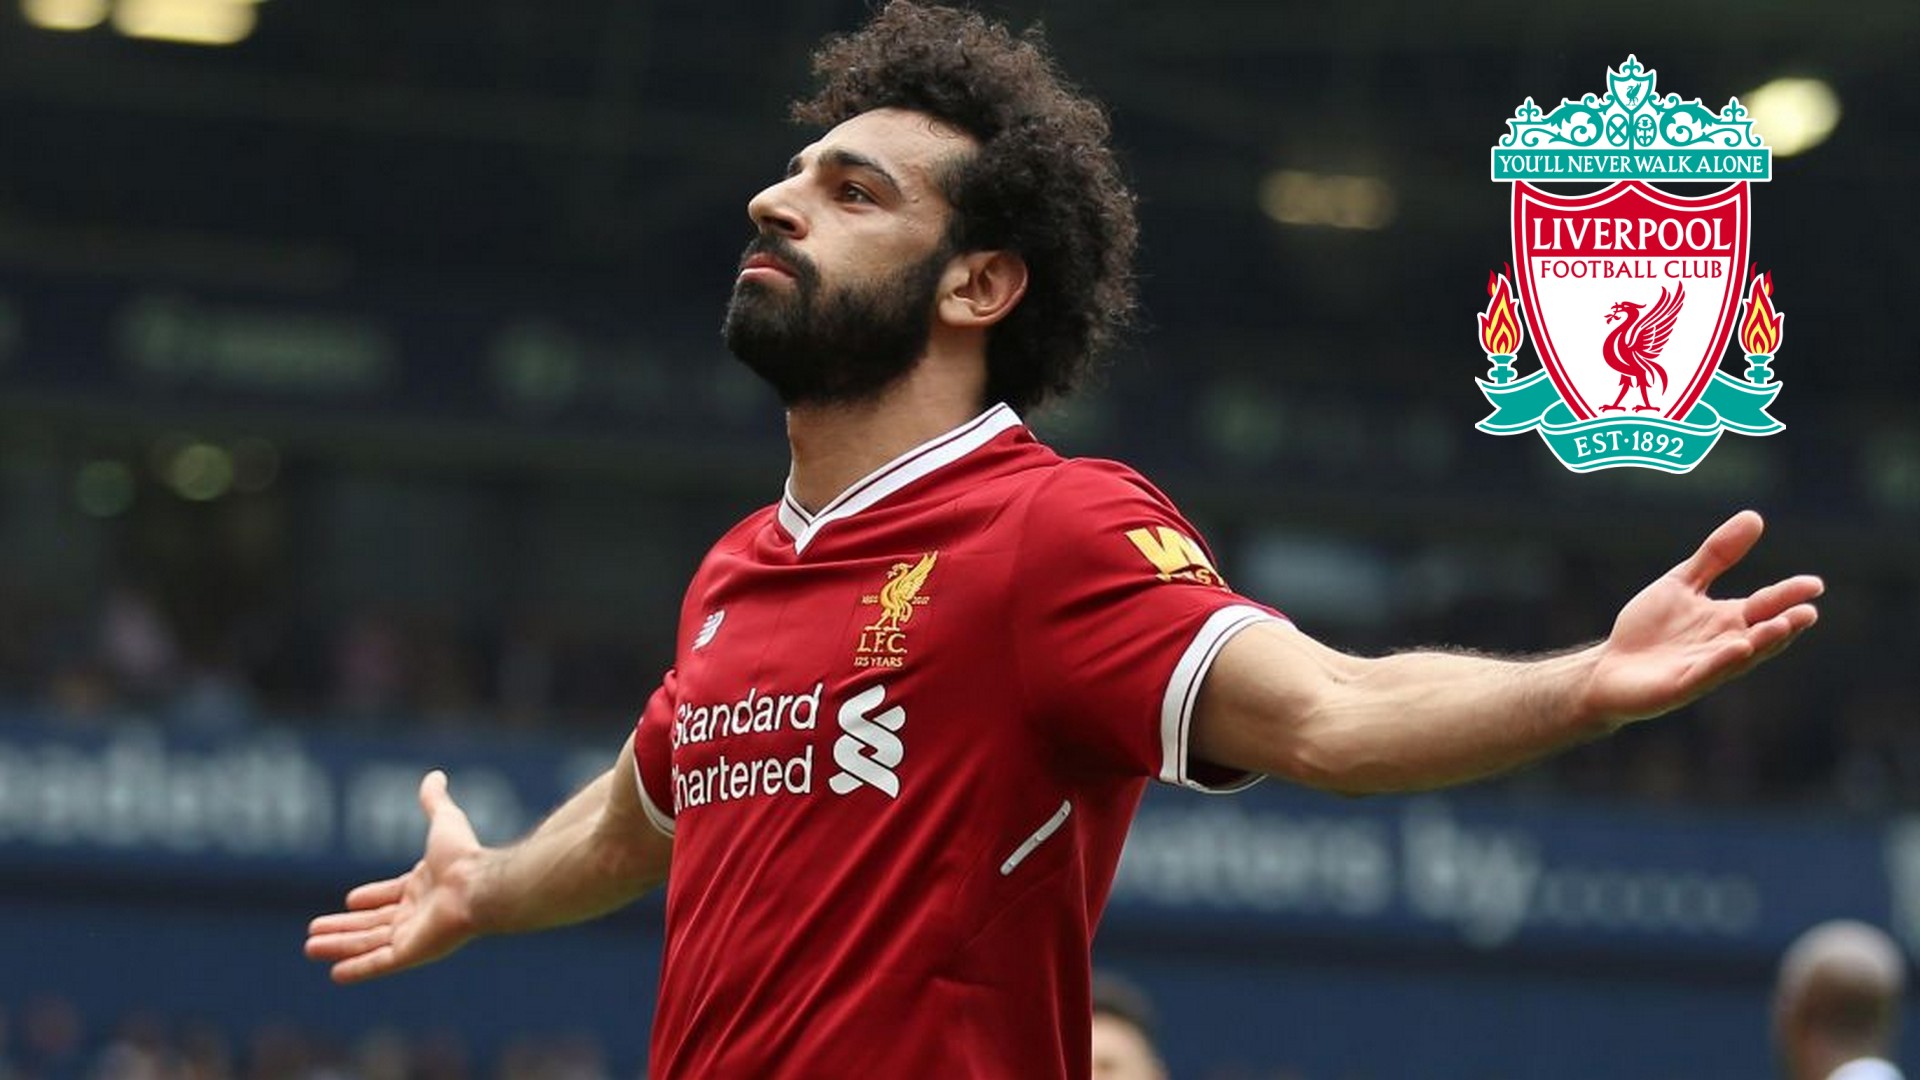 HD Wallpaper Mohamed Salah Liverpool With Resolution 1920X1080 pixel. You can make this wallpaper for your Desktop Computer Backgrounds, Mac Wallpapers, Android Lock screen or iPhone Screensavers